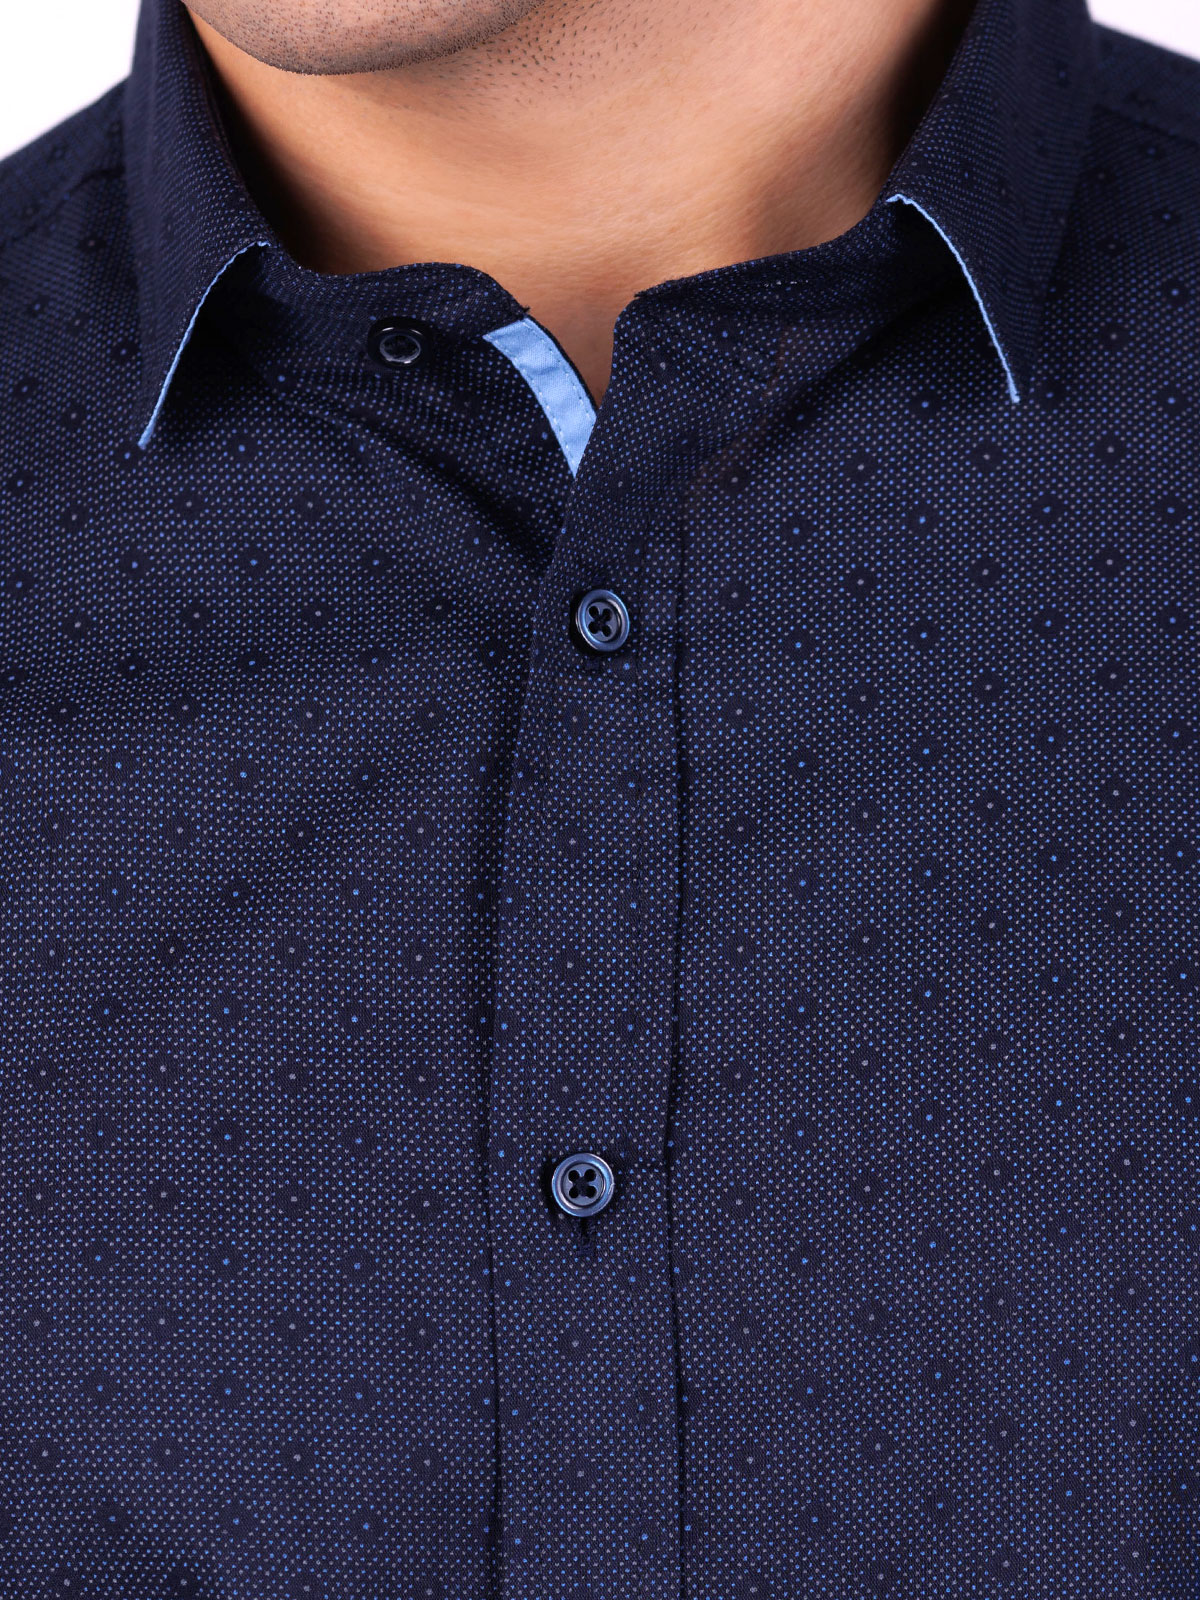 Shirt in dark blue with a figure pattern - 21536 € 43.87 img2